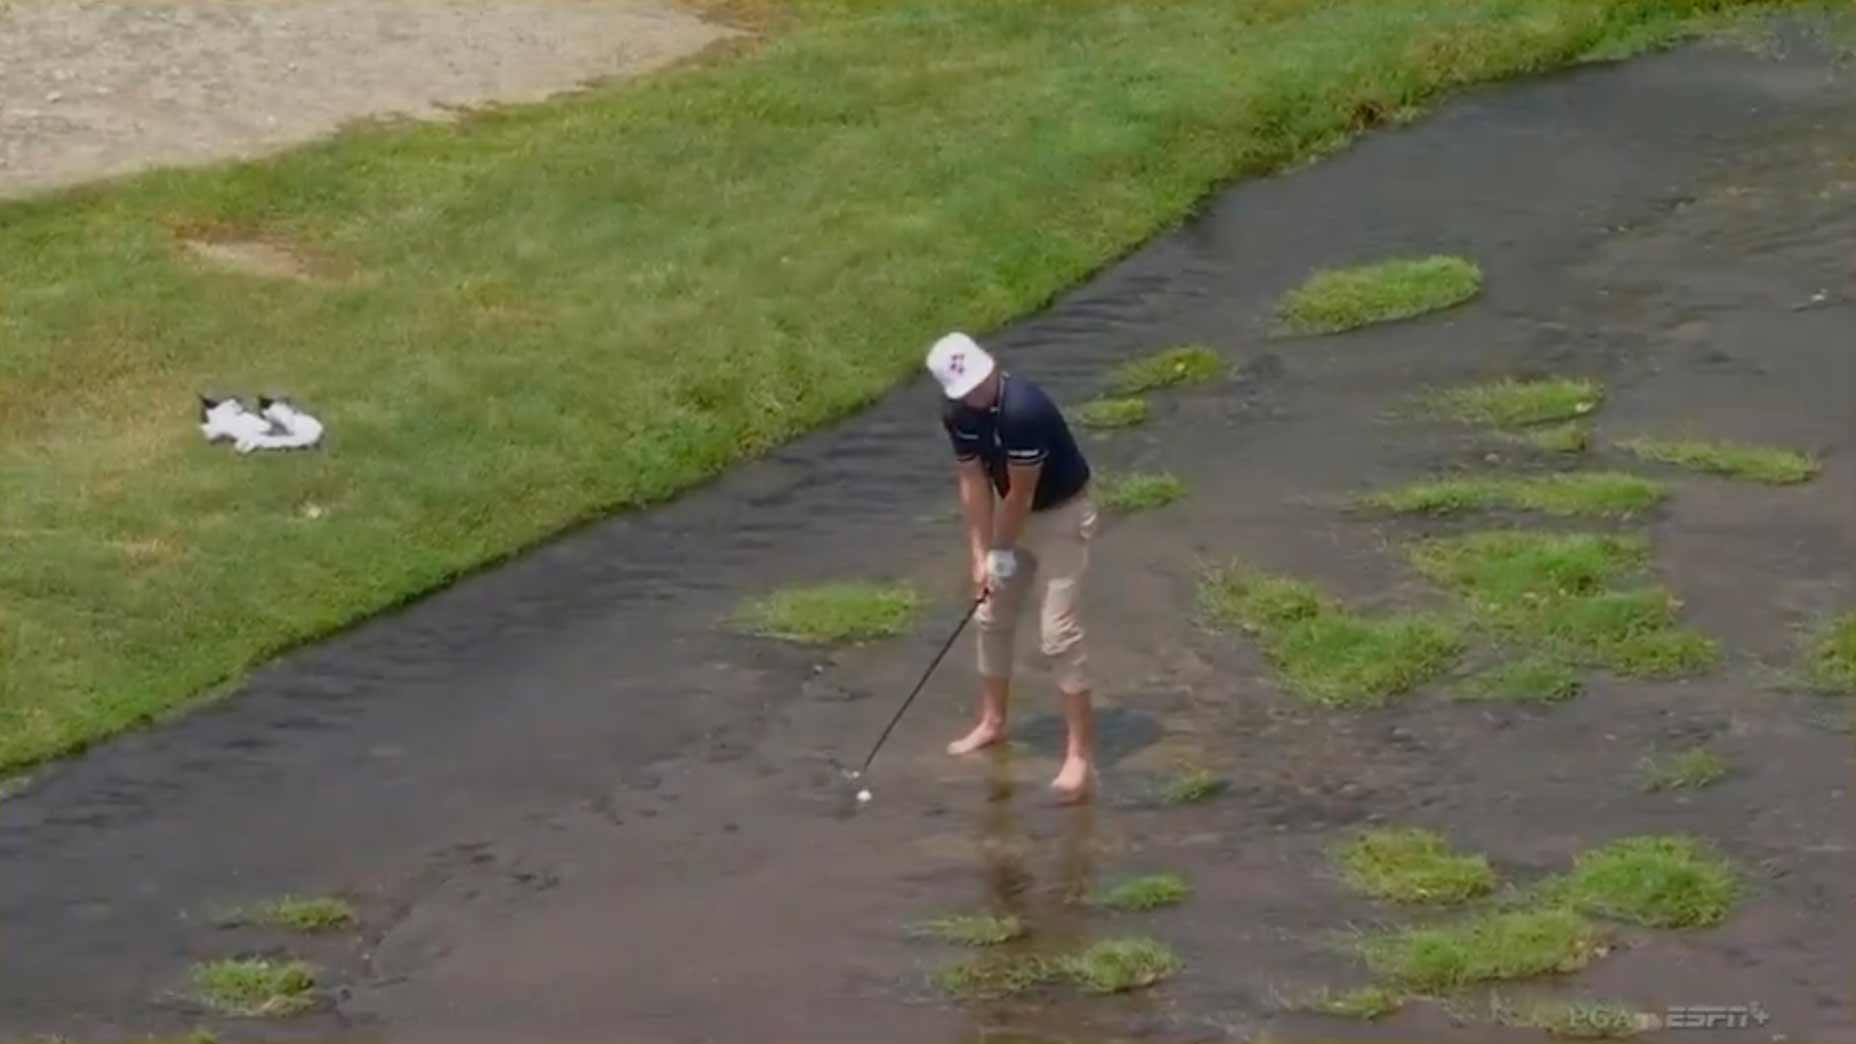 Cam Smith hit from the water at the PGA Championship.